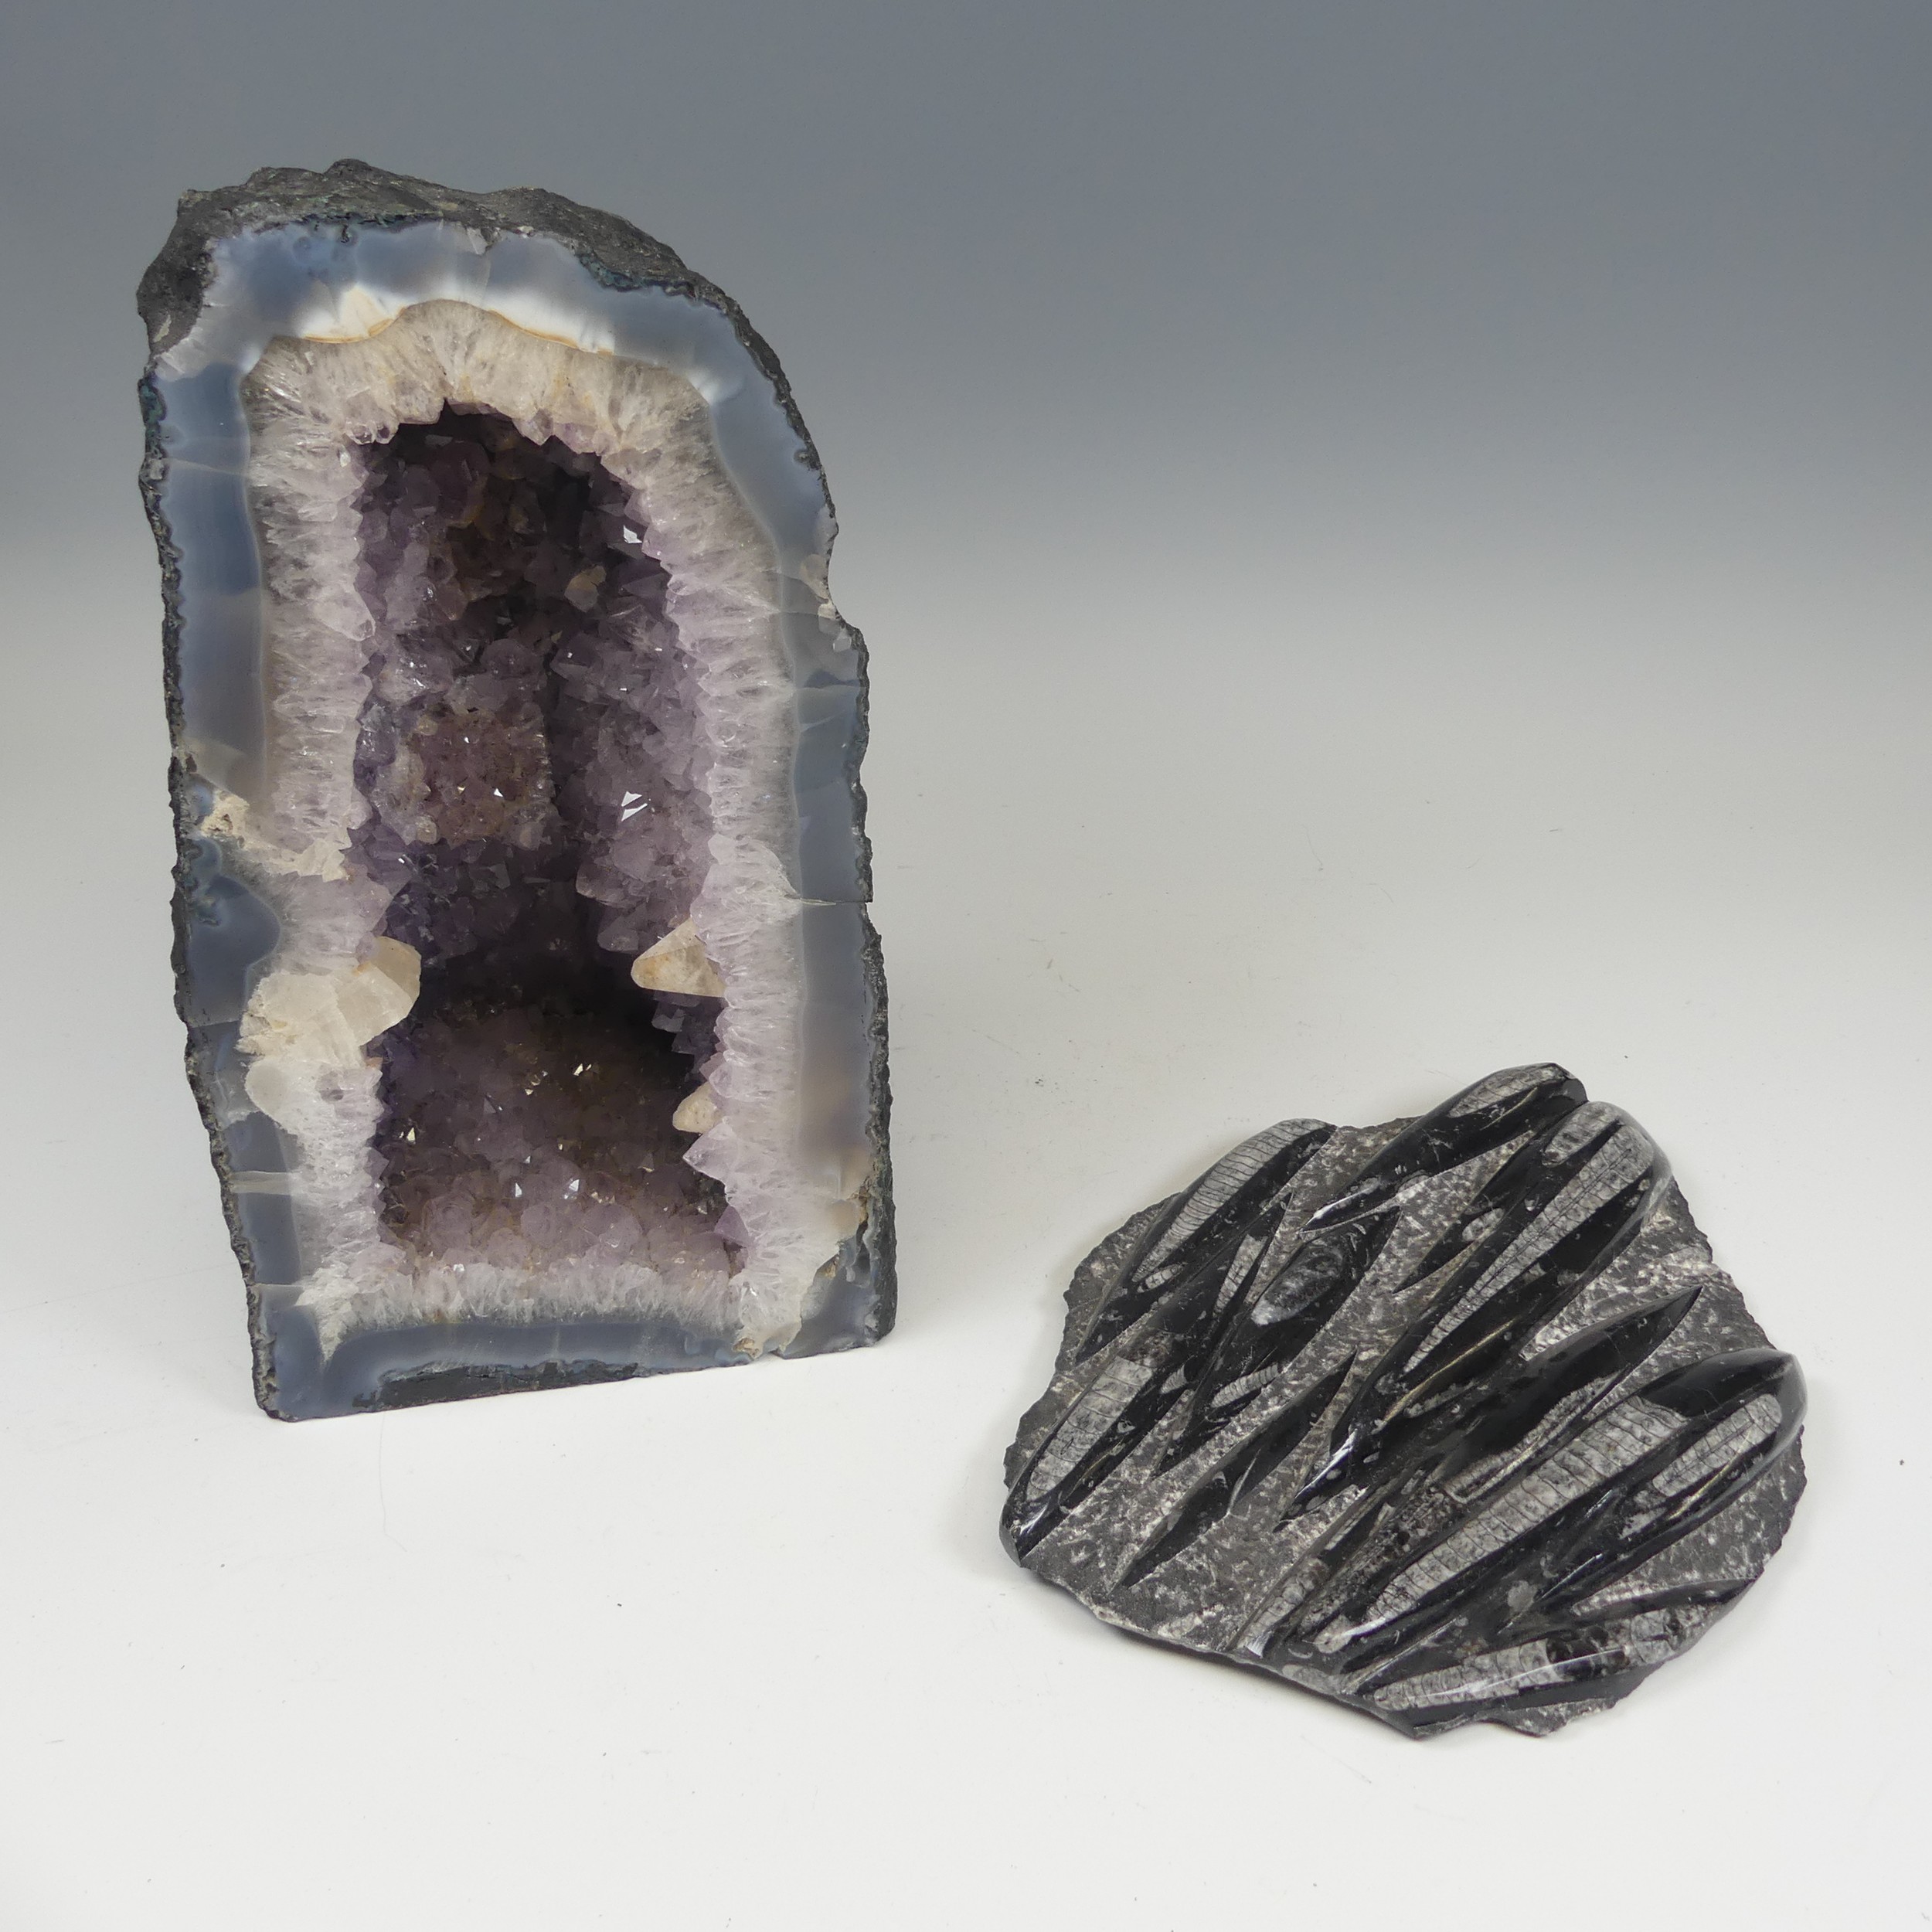 A large amethyst and quartz 'cathedral' Geode, free standing with flat base, with well-defined